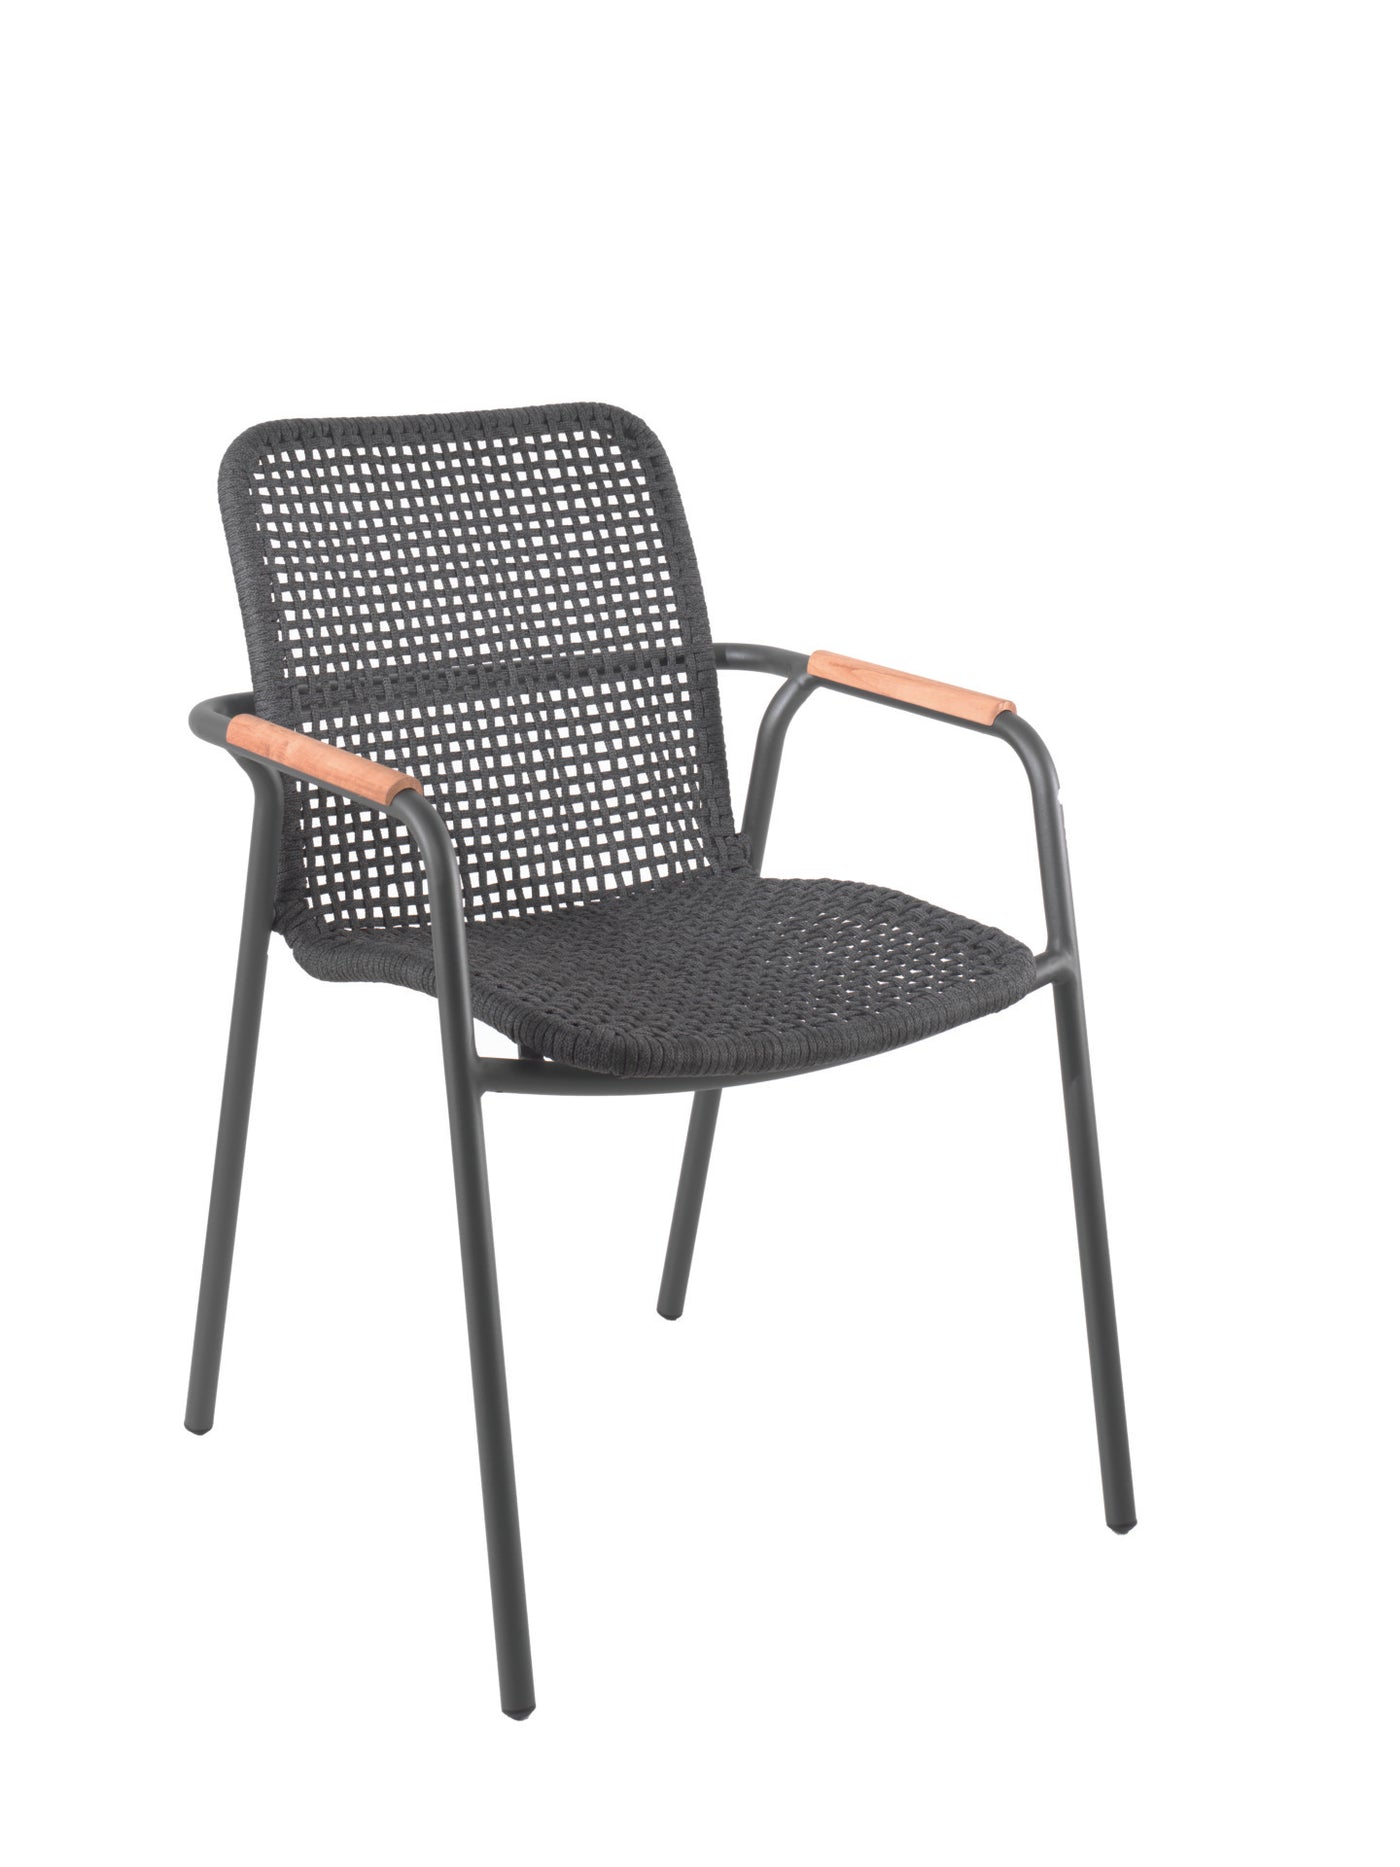 Diego Stacking Chair - Aluminum / Rope Black With Teak Arm